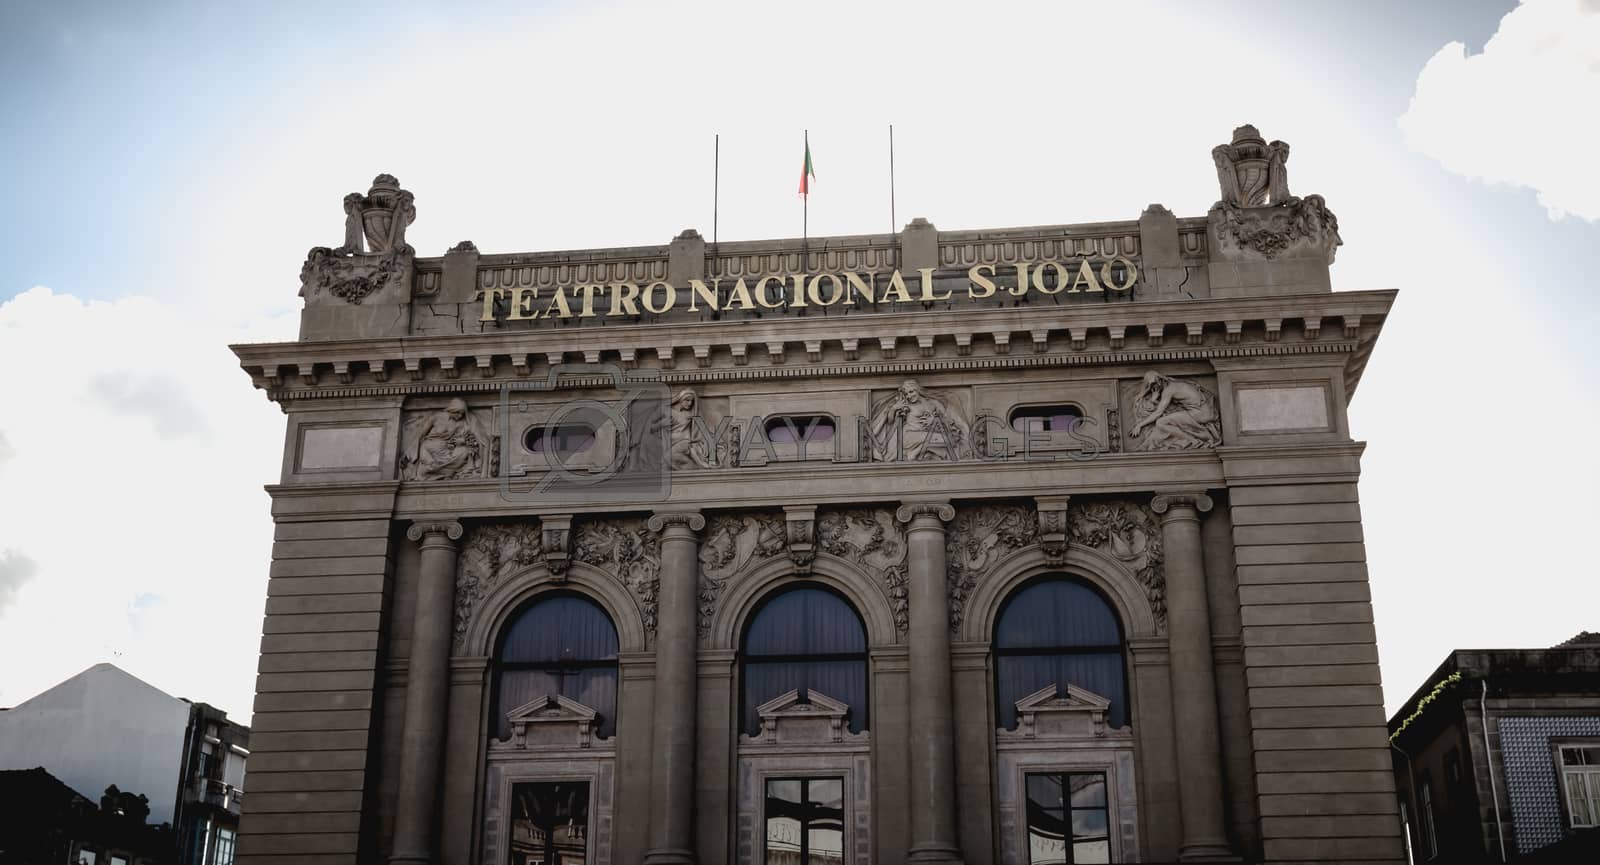 Royalty free image of Architectural detail of St Joao National Theater in Porto, Portu by AtlanticEUROSTOXX